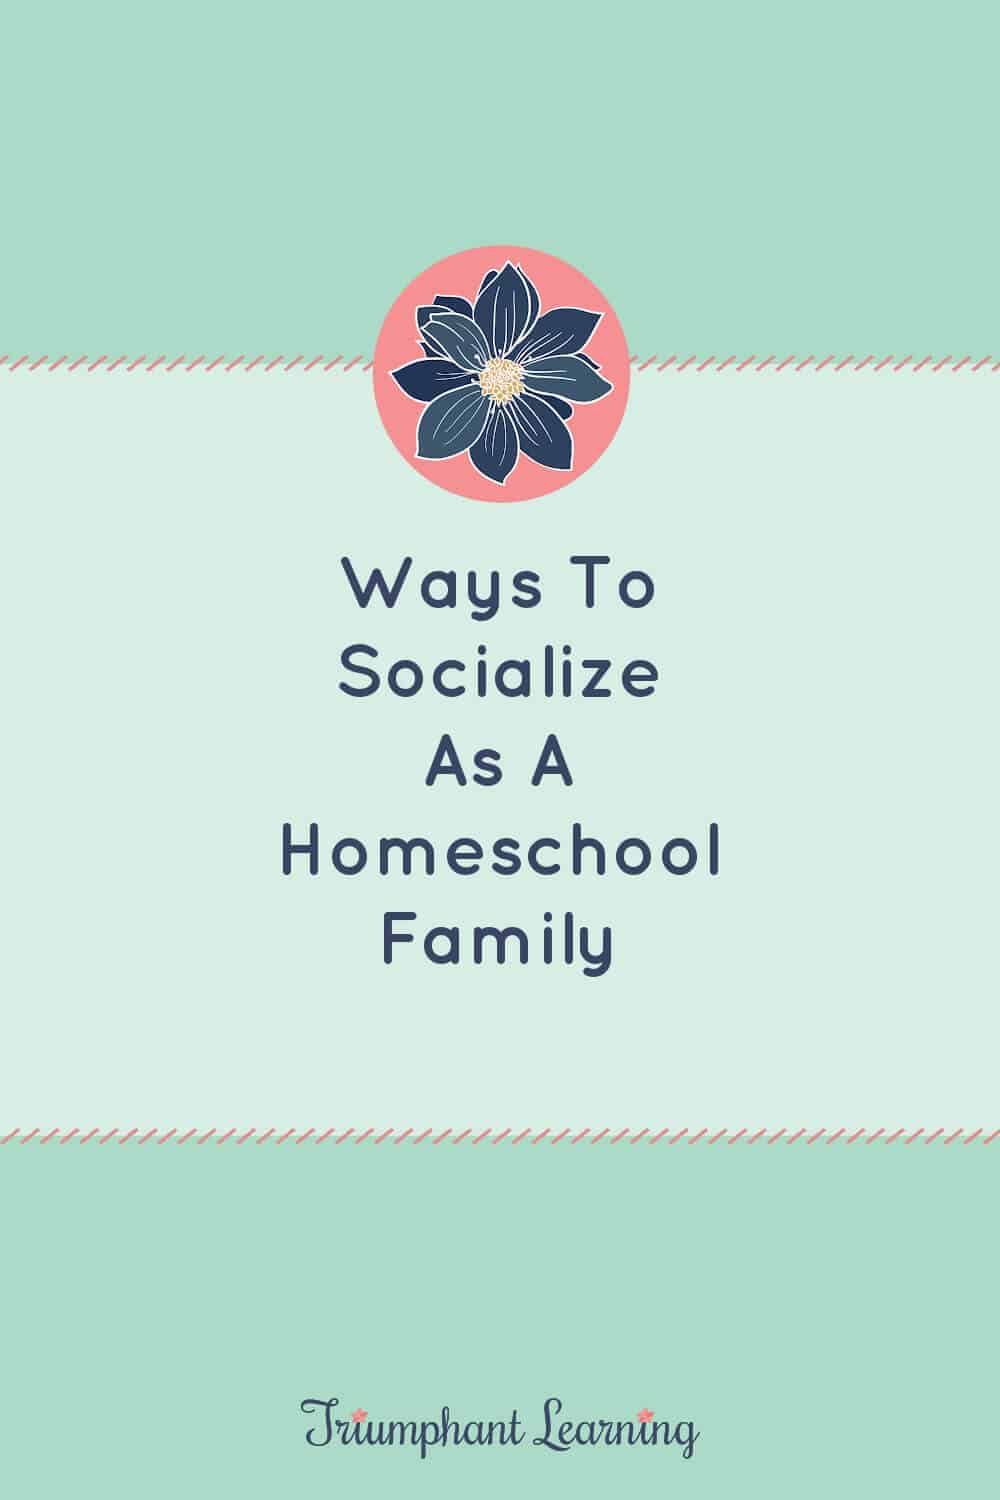 Learn about the benefits and challenges of homeschool socialization and ways you can create your social network as a homeschool family. via @TriLearning